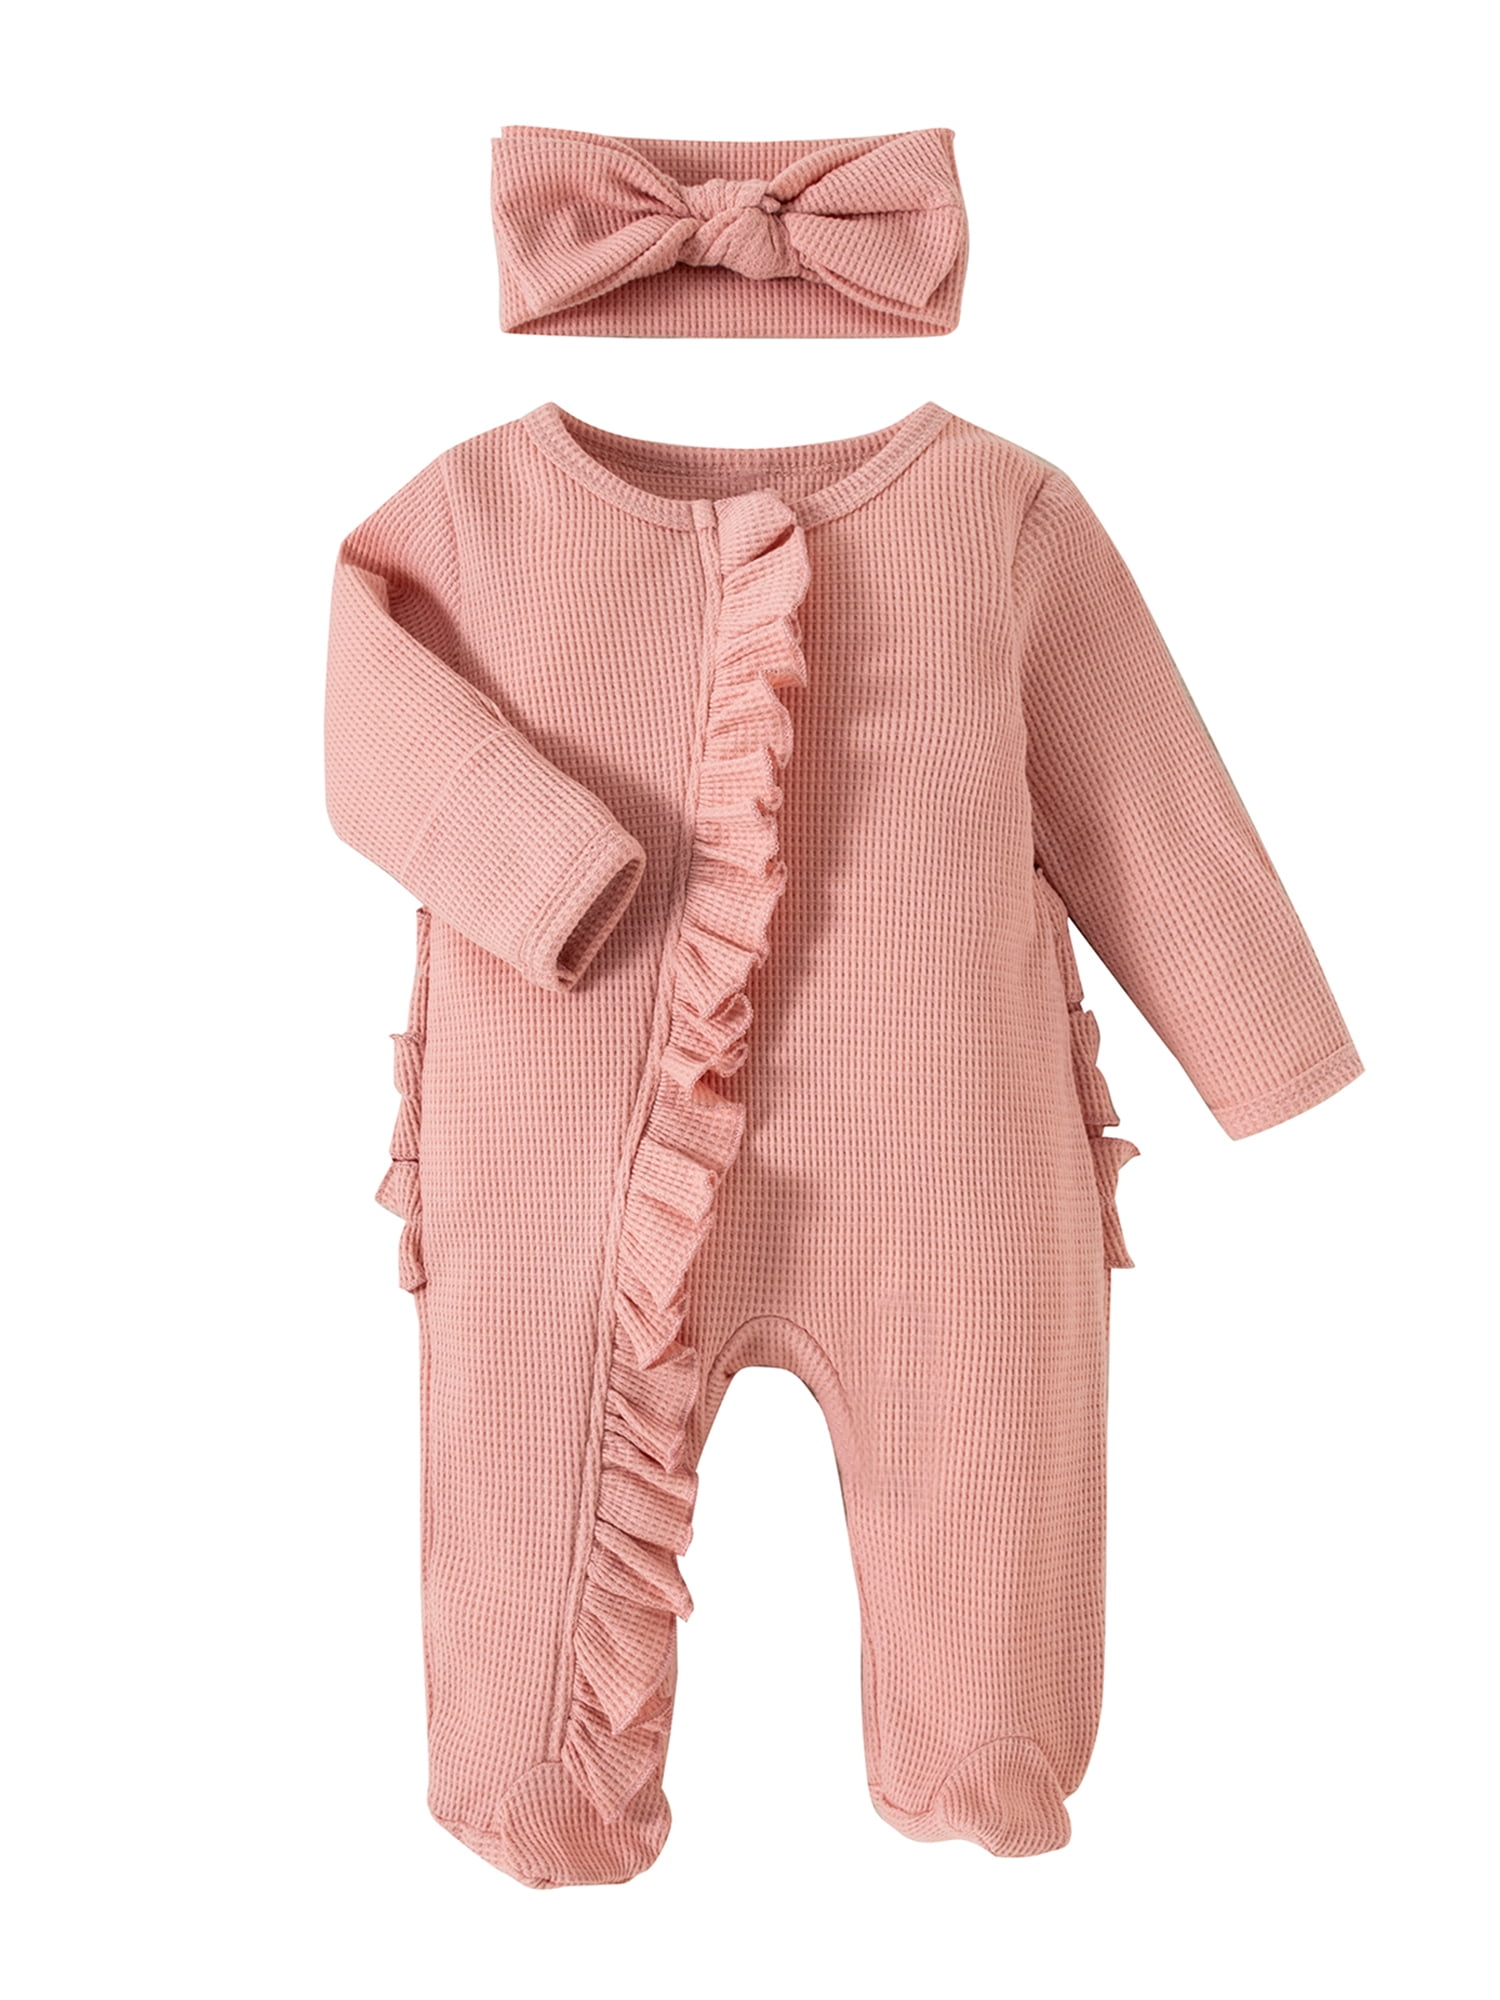 Baby Girl Coming Home Outfit Baby Girl Clothes Newborn Girl Coming Home  Outfit Baby Girl Romper Newborn Girl Clothes Baby Girl Gift 